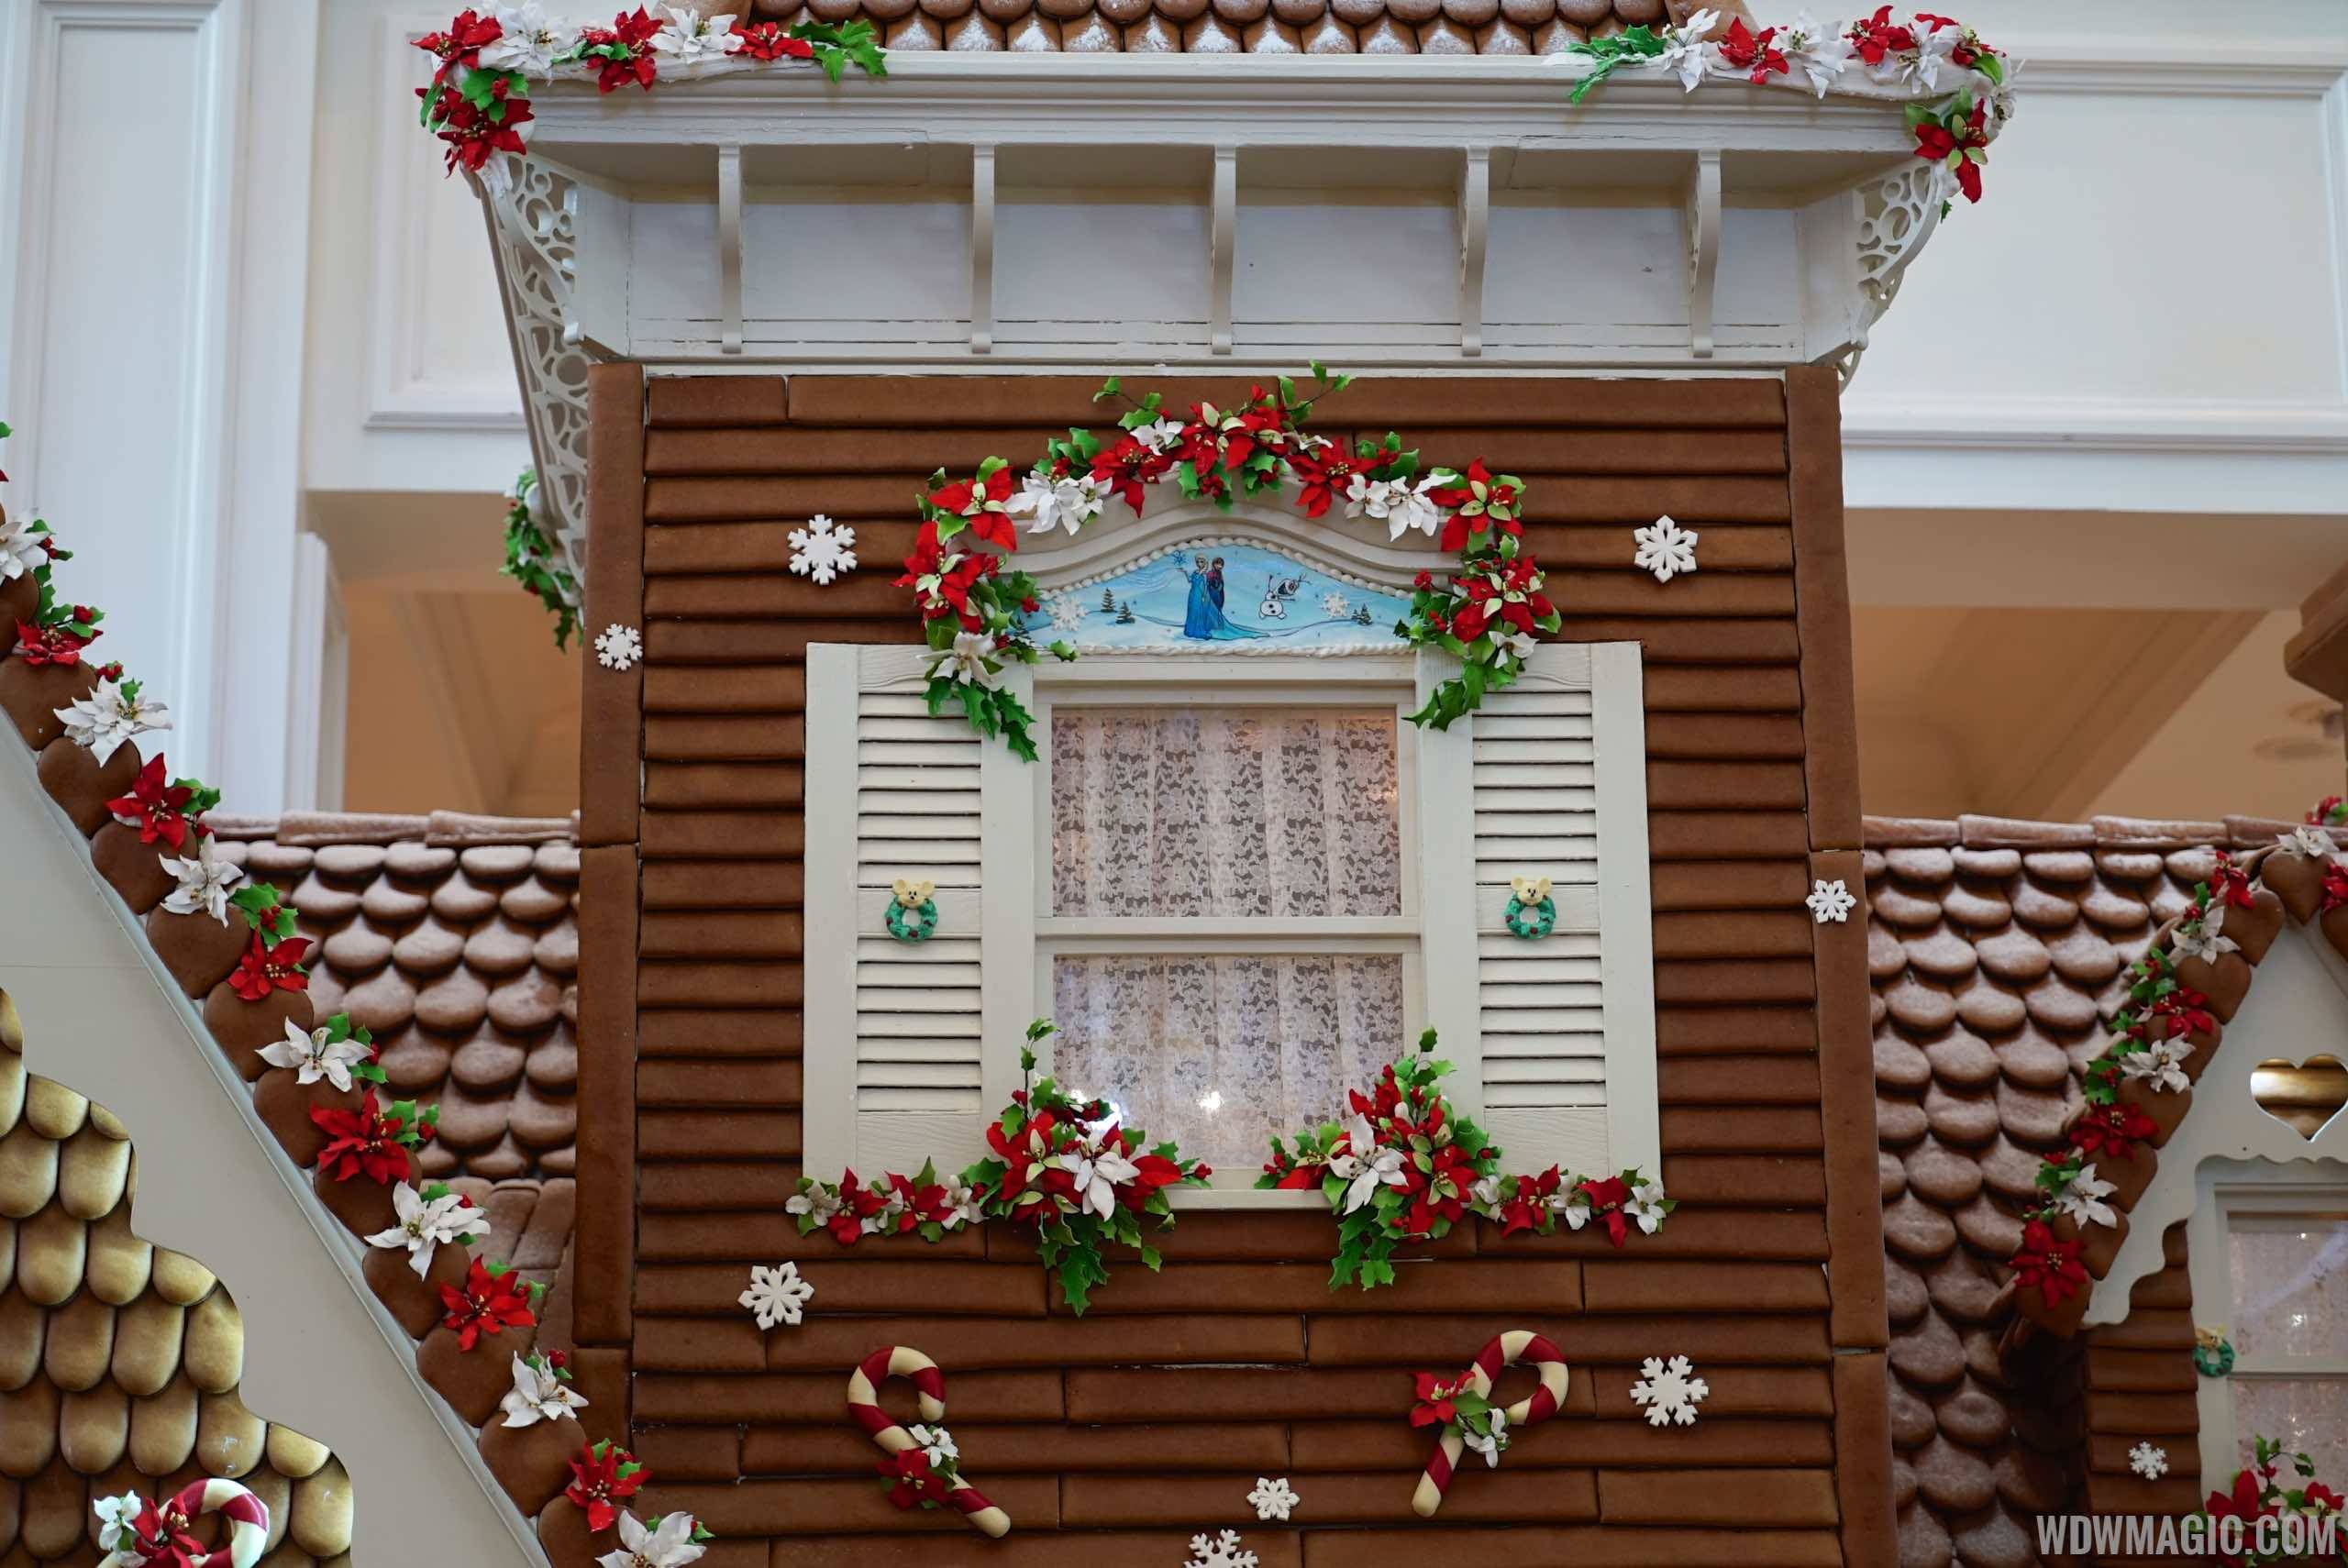 2014 Grand Floridian Gingerbread House